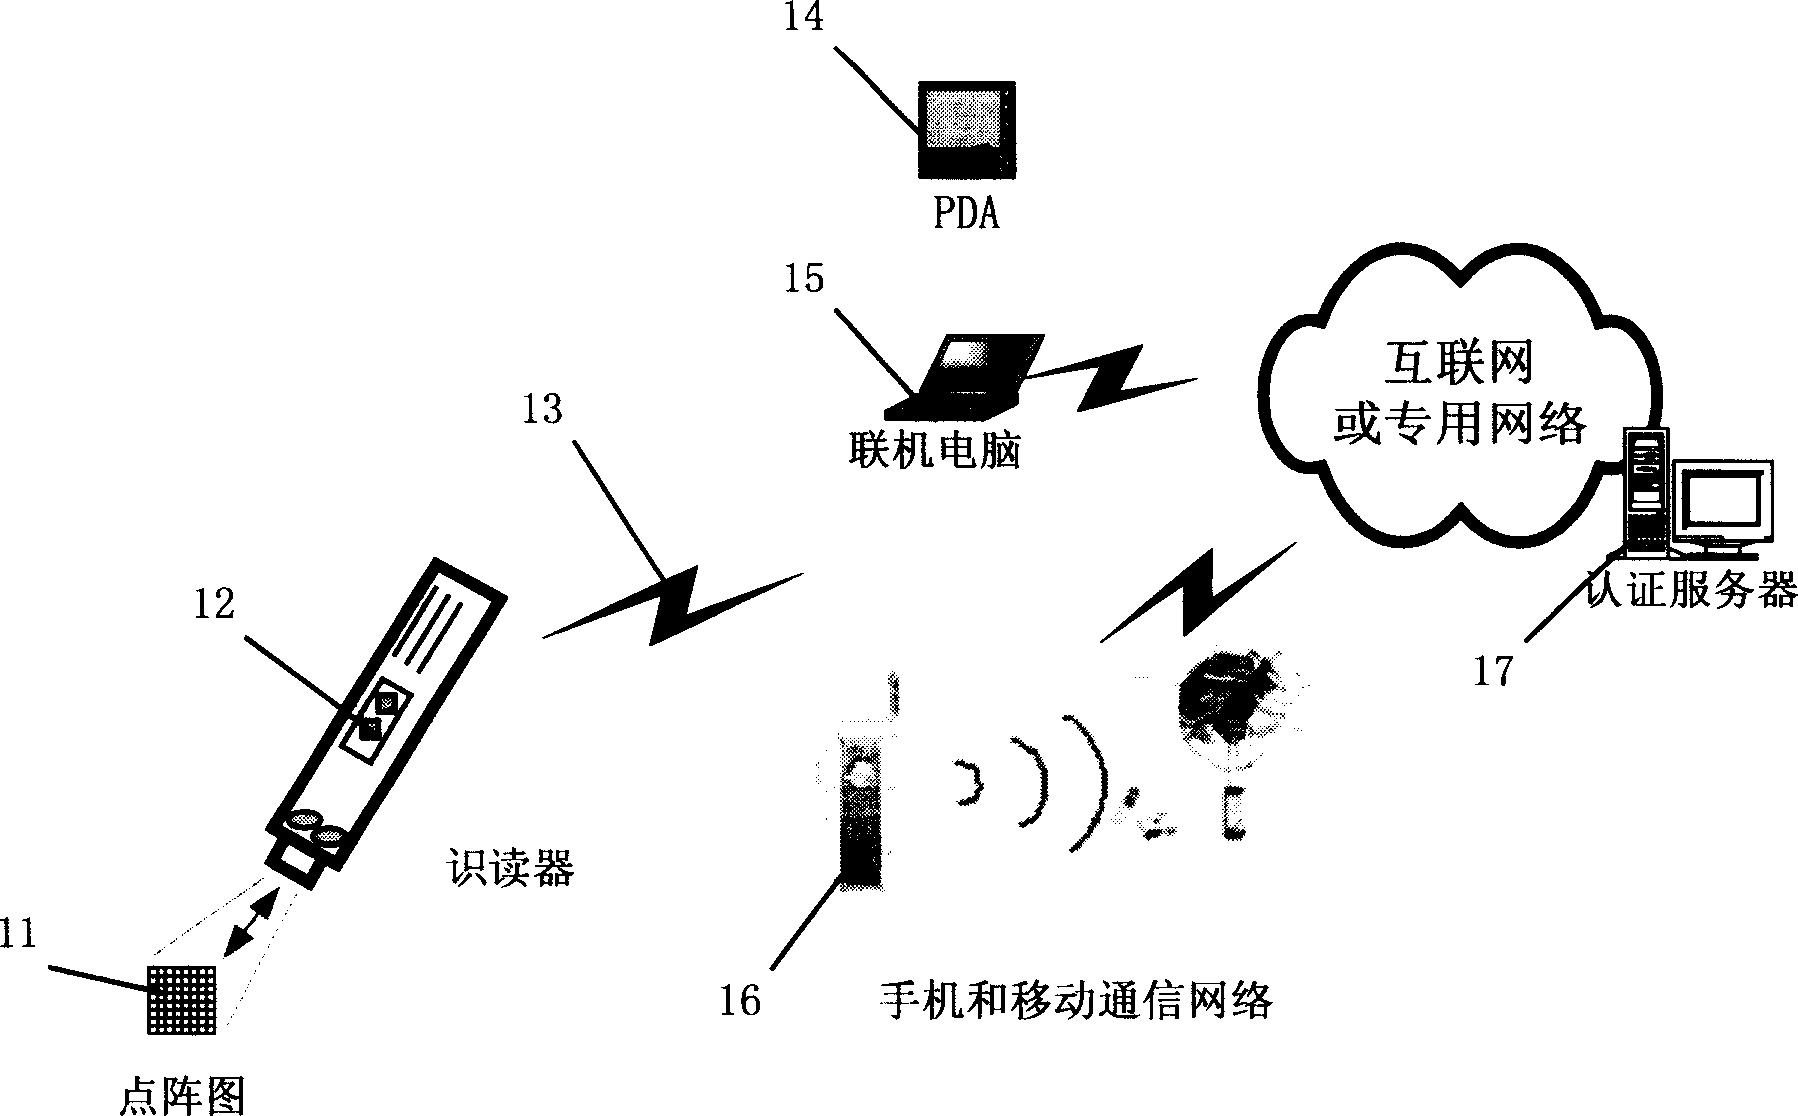 Method for identifying and verifying truth of goods using digital array